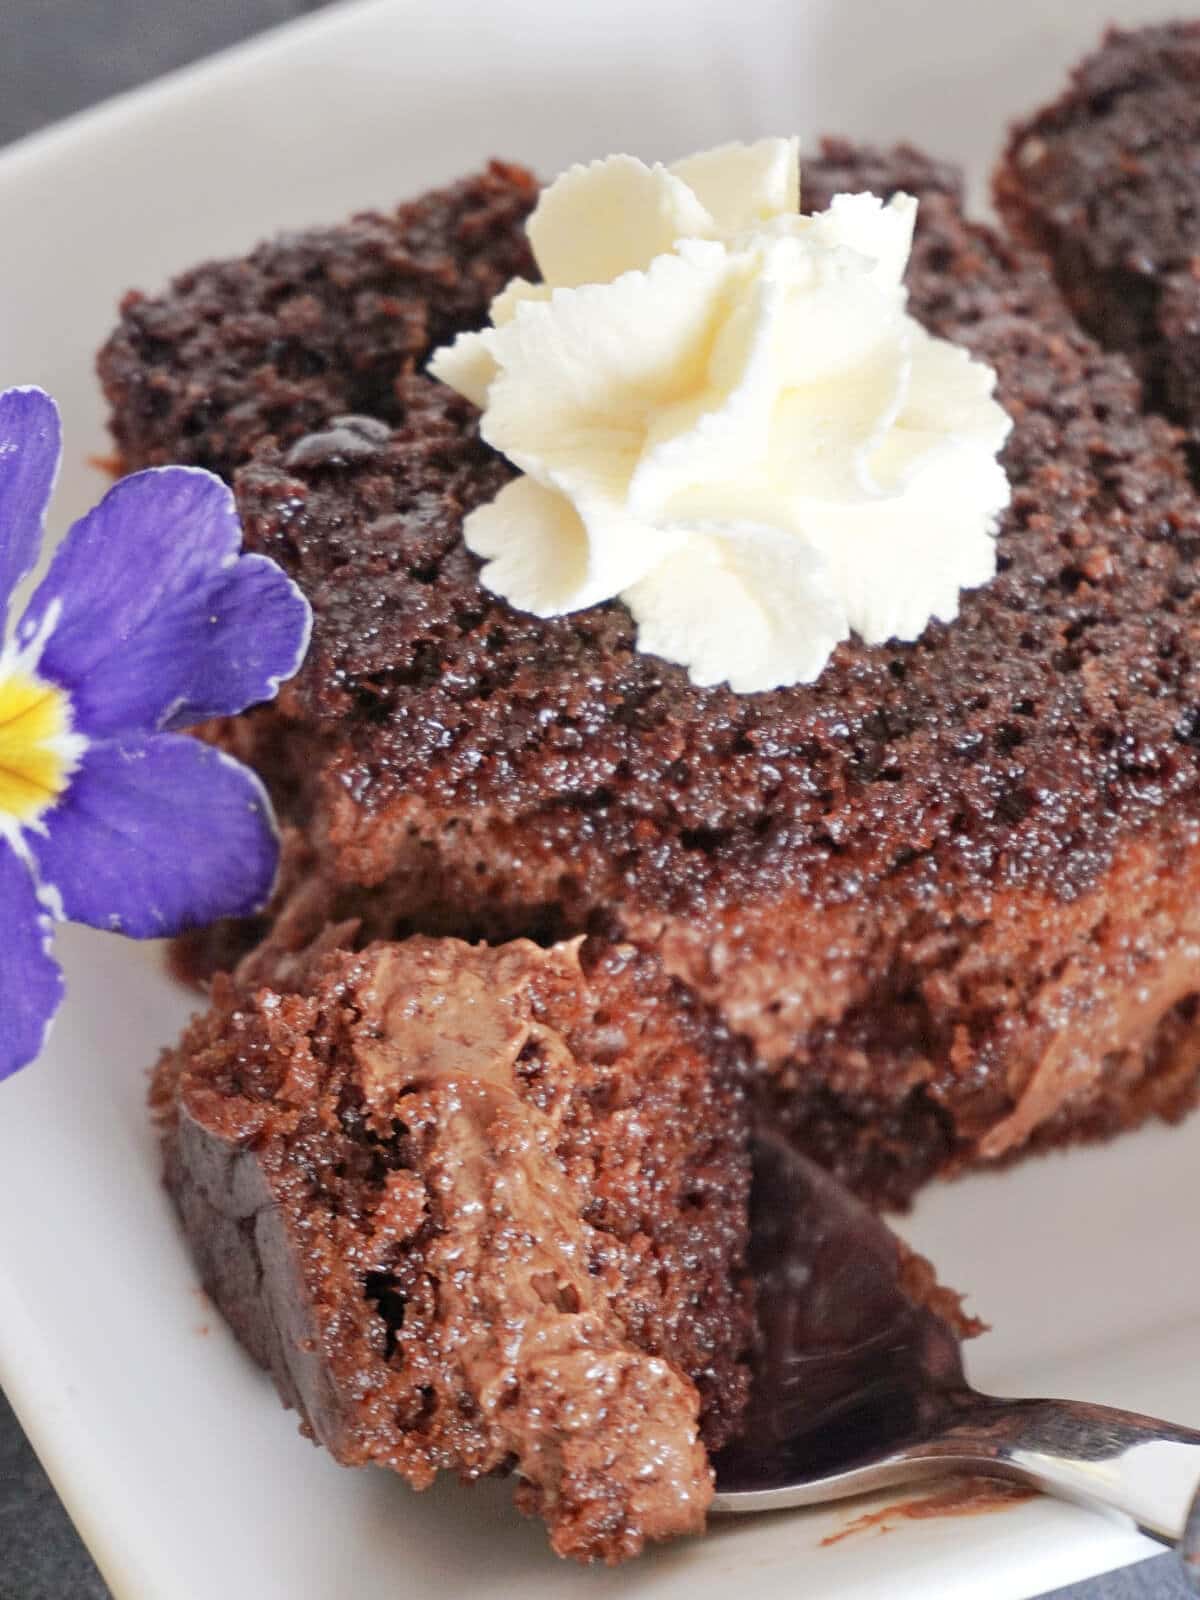 Close-up shot of a slice of chocolate and nutella cake.